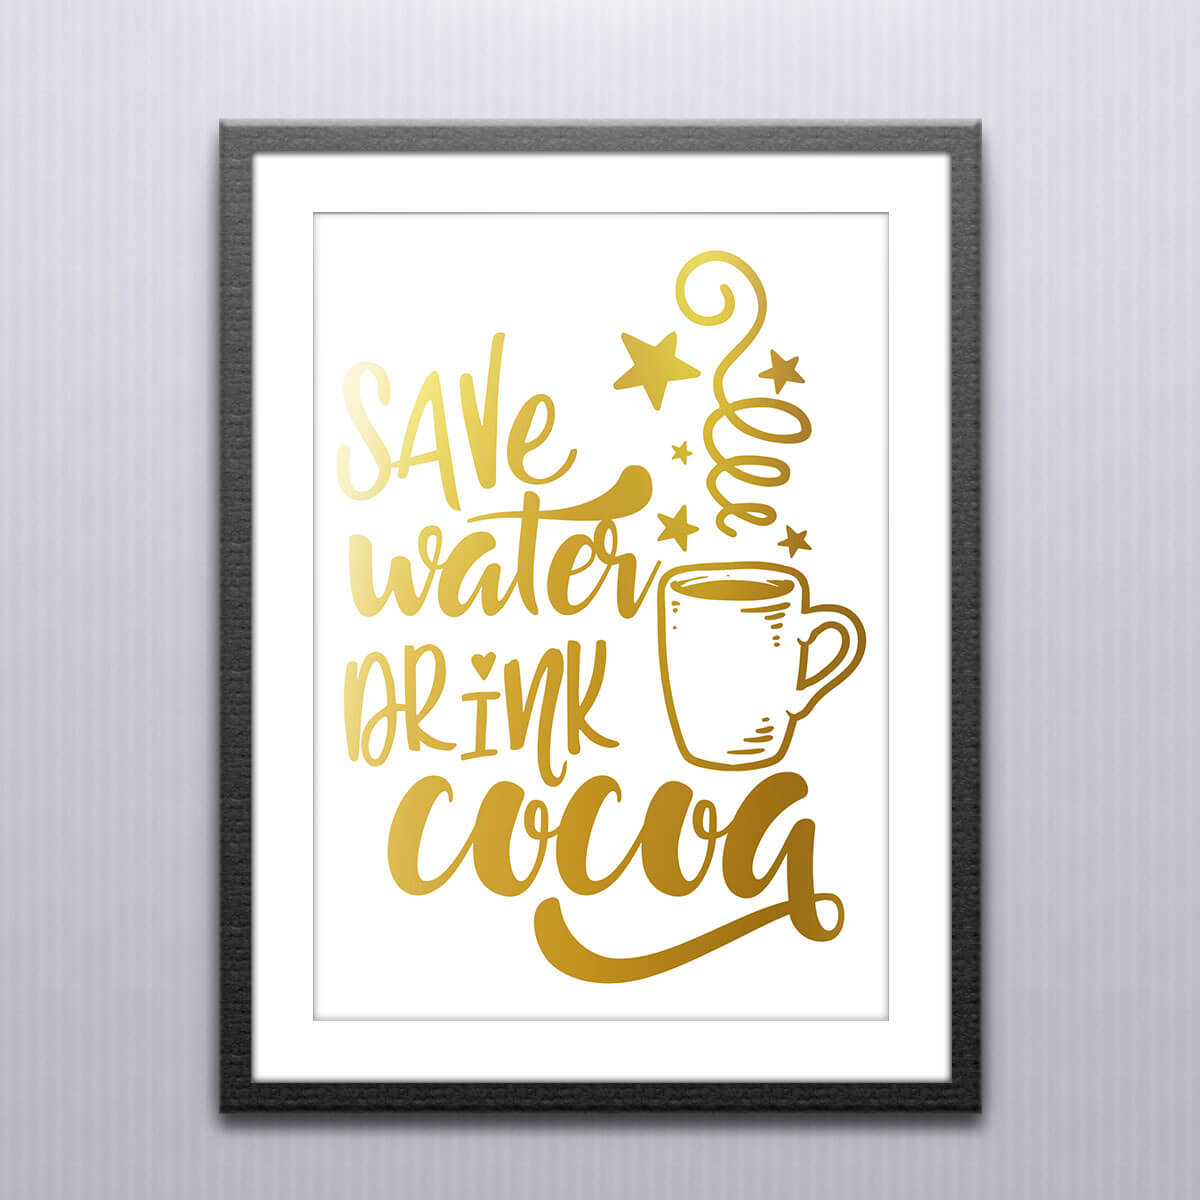 Christmas Wall Art, ‘Save Water Drink Cocoa’, Gold Foiled